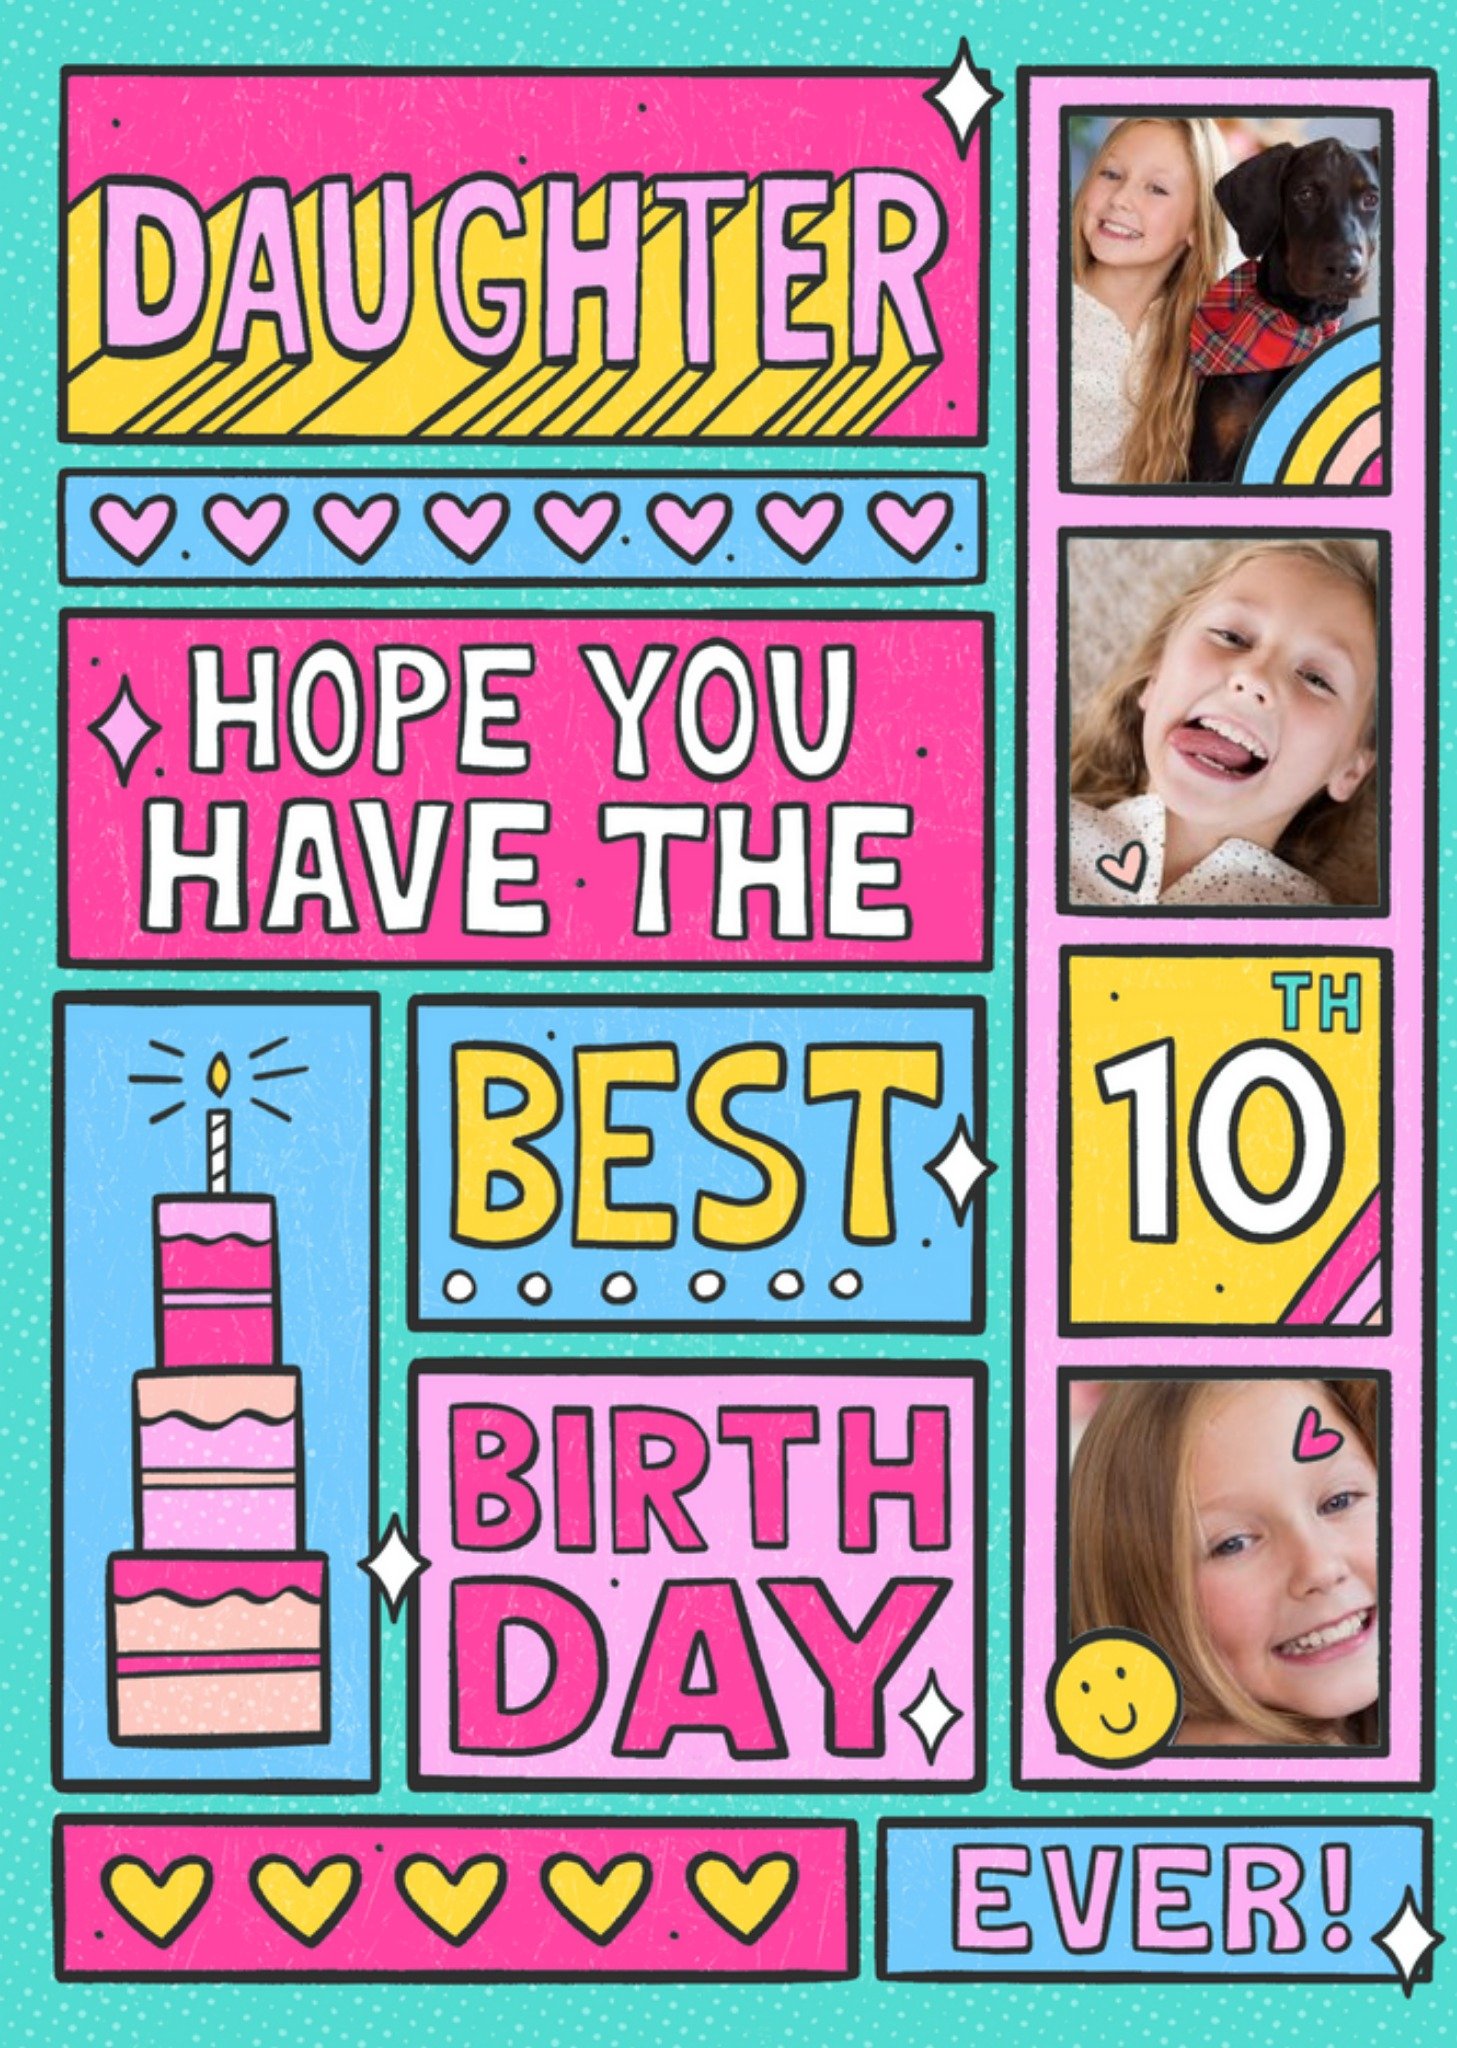 Moonpig Spoof Comic Strip Daughter Photo Upload 10th Birthday Card, Large